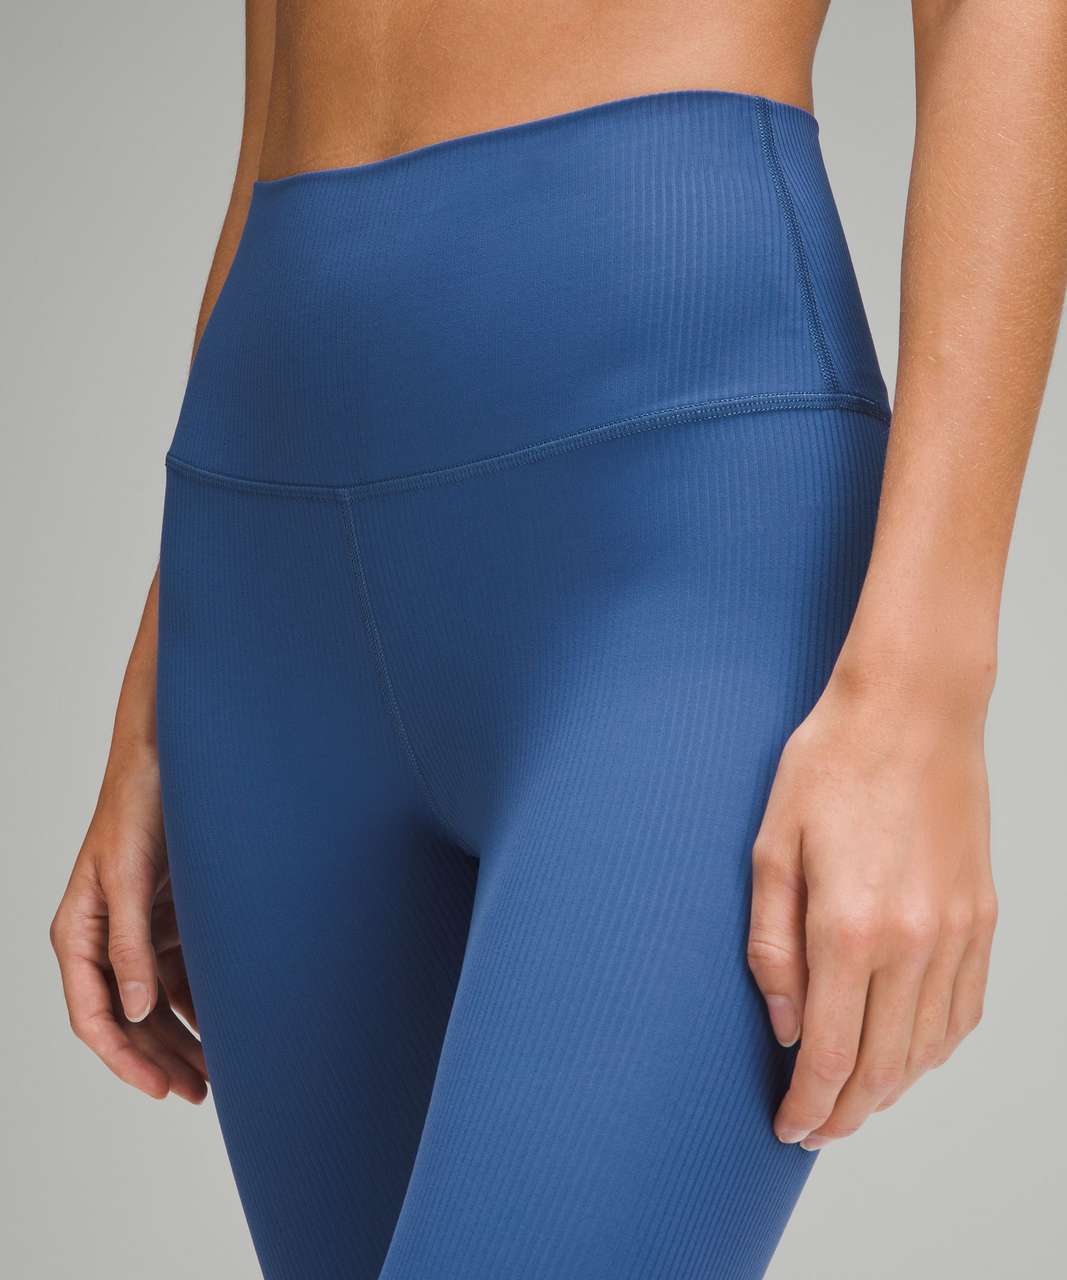 What color is this leggings? I thought it is pitch blue (2nd pic